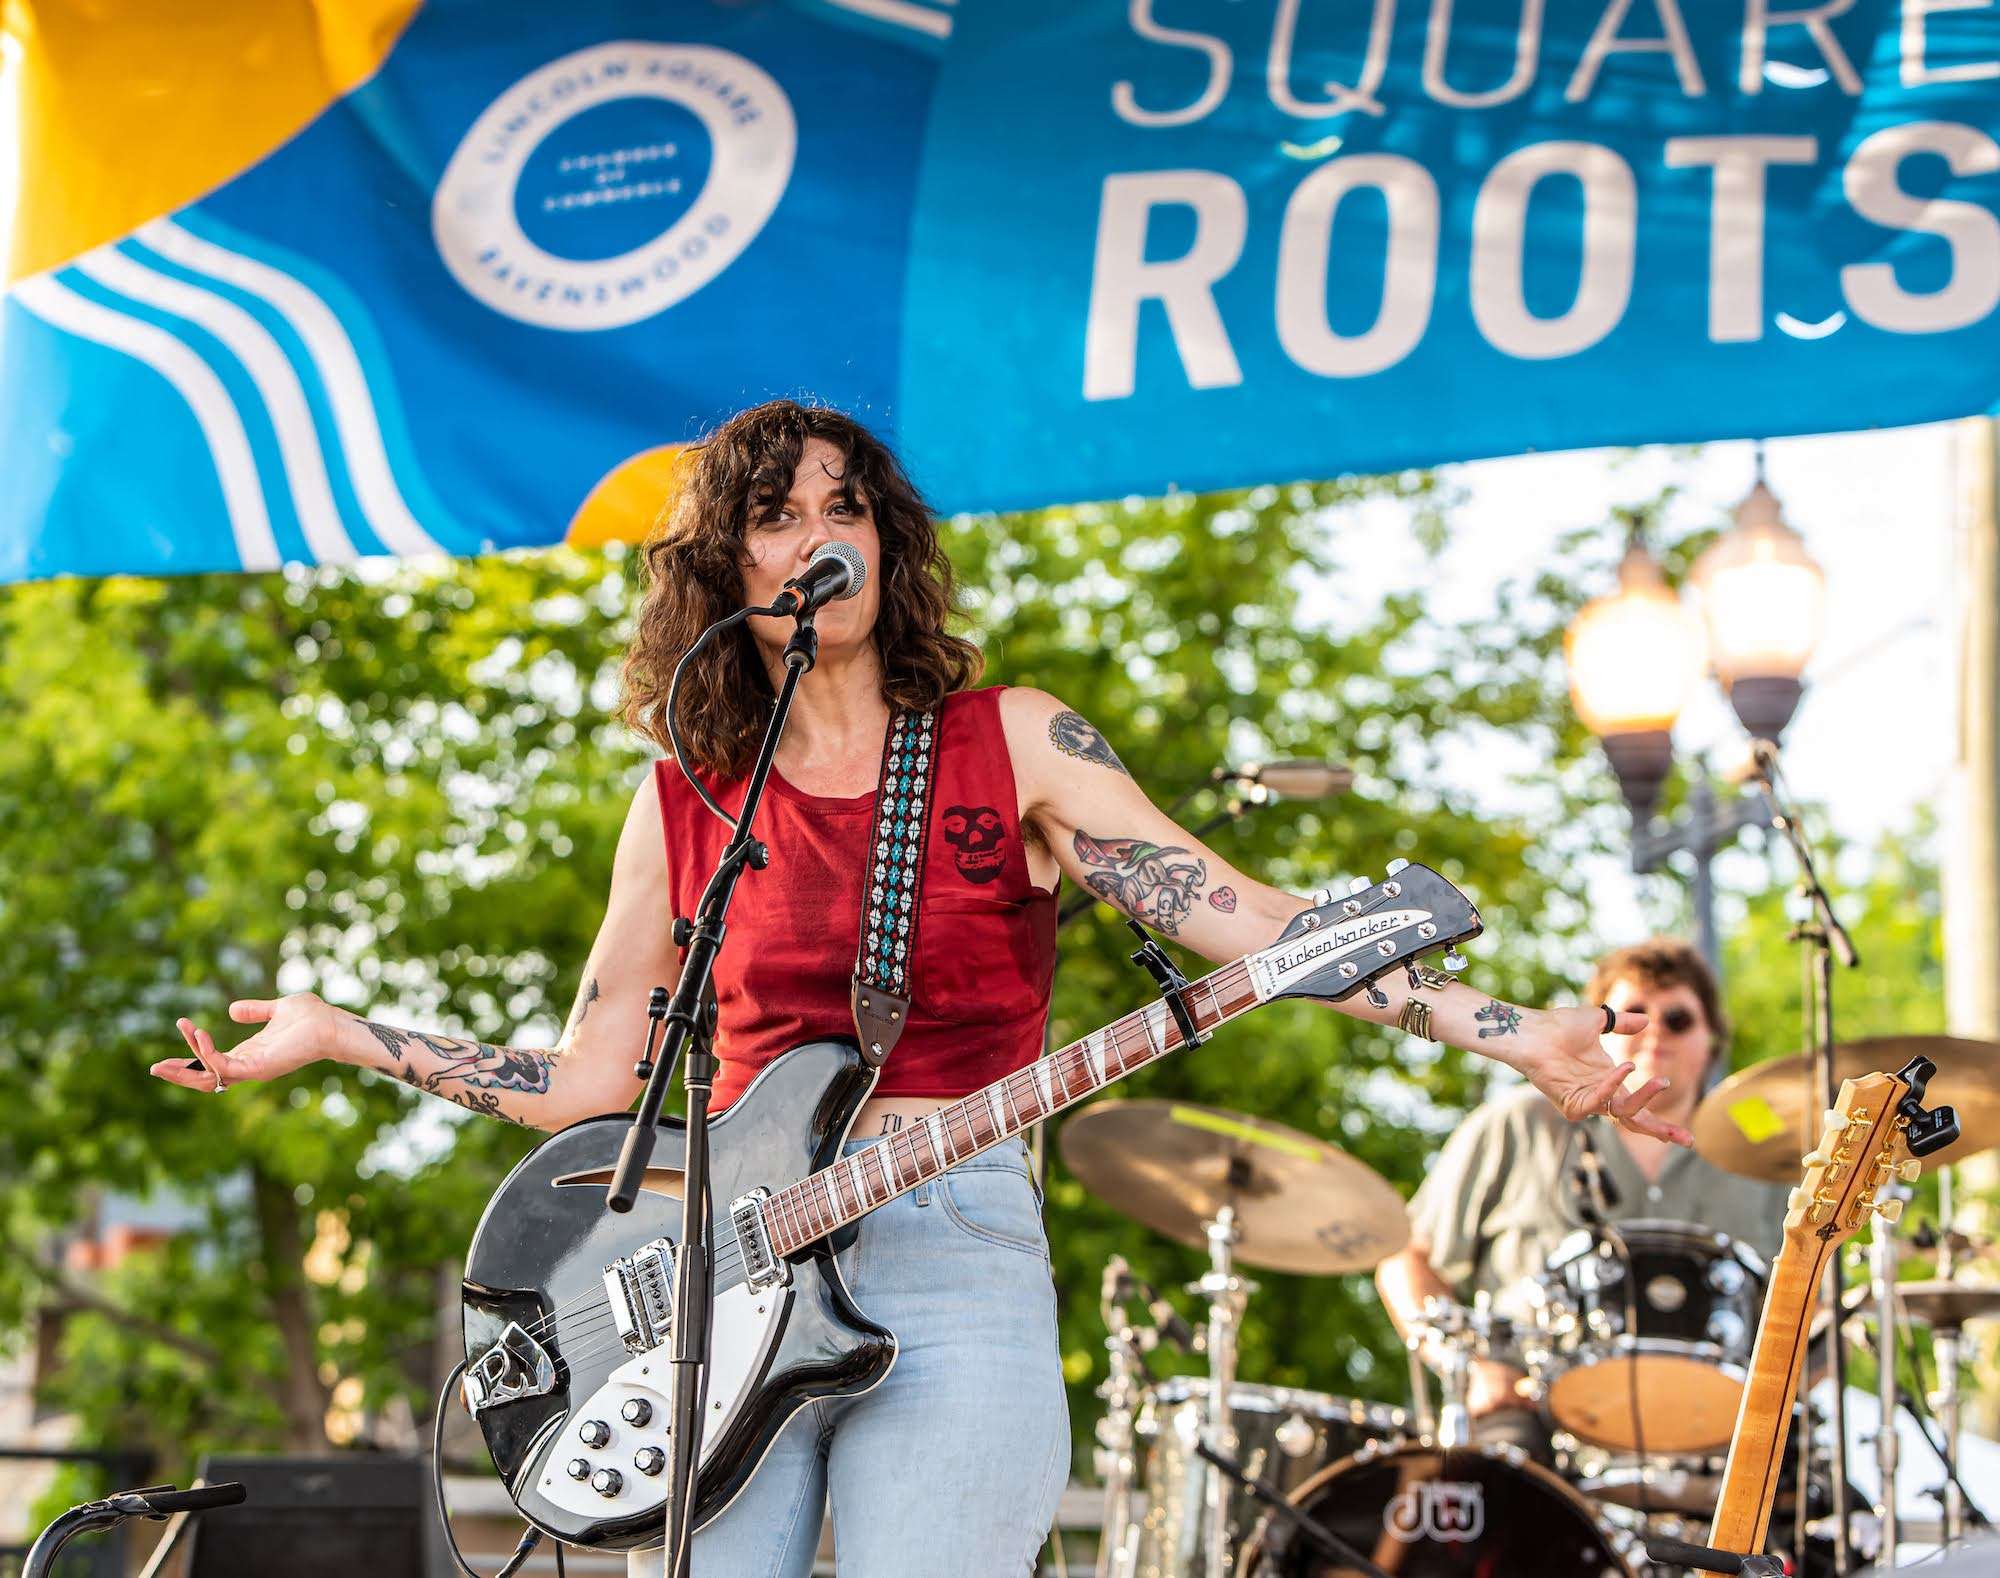 Lilly Hiatt Live at Square Roots Fest [GALLERY] 4